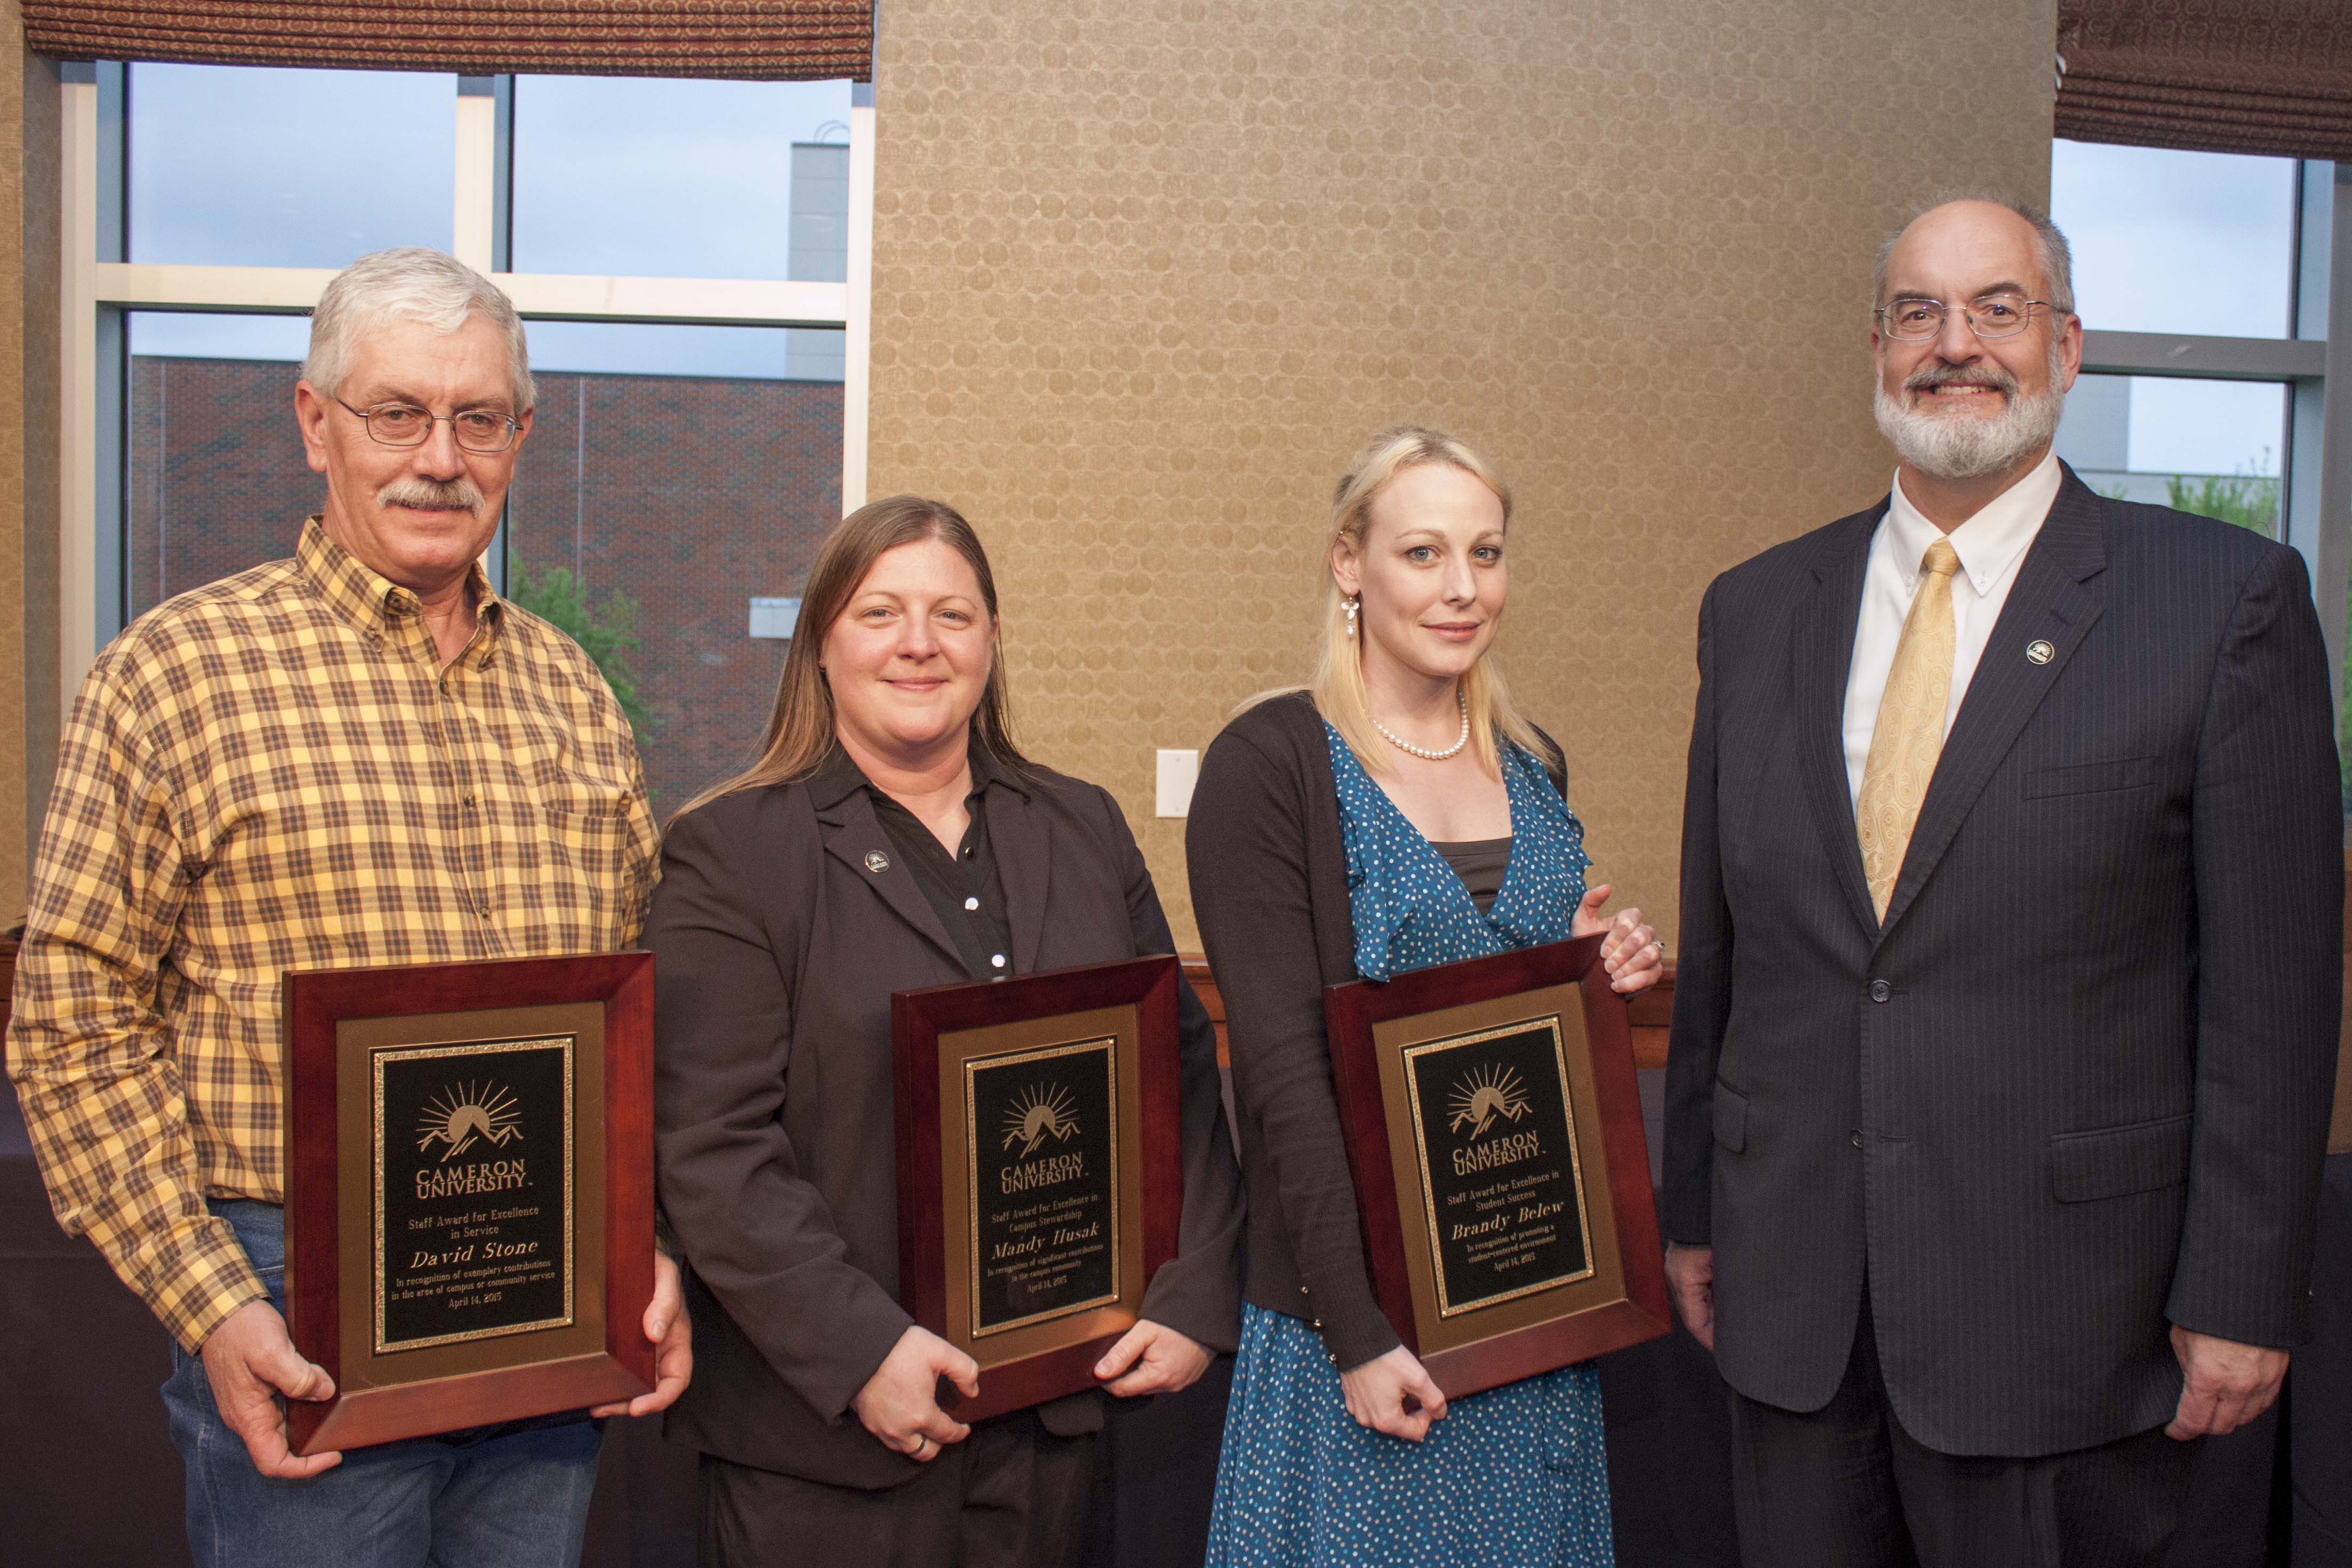 Staff and faculty members recongized with awards